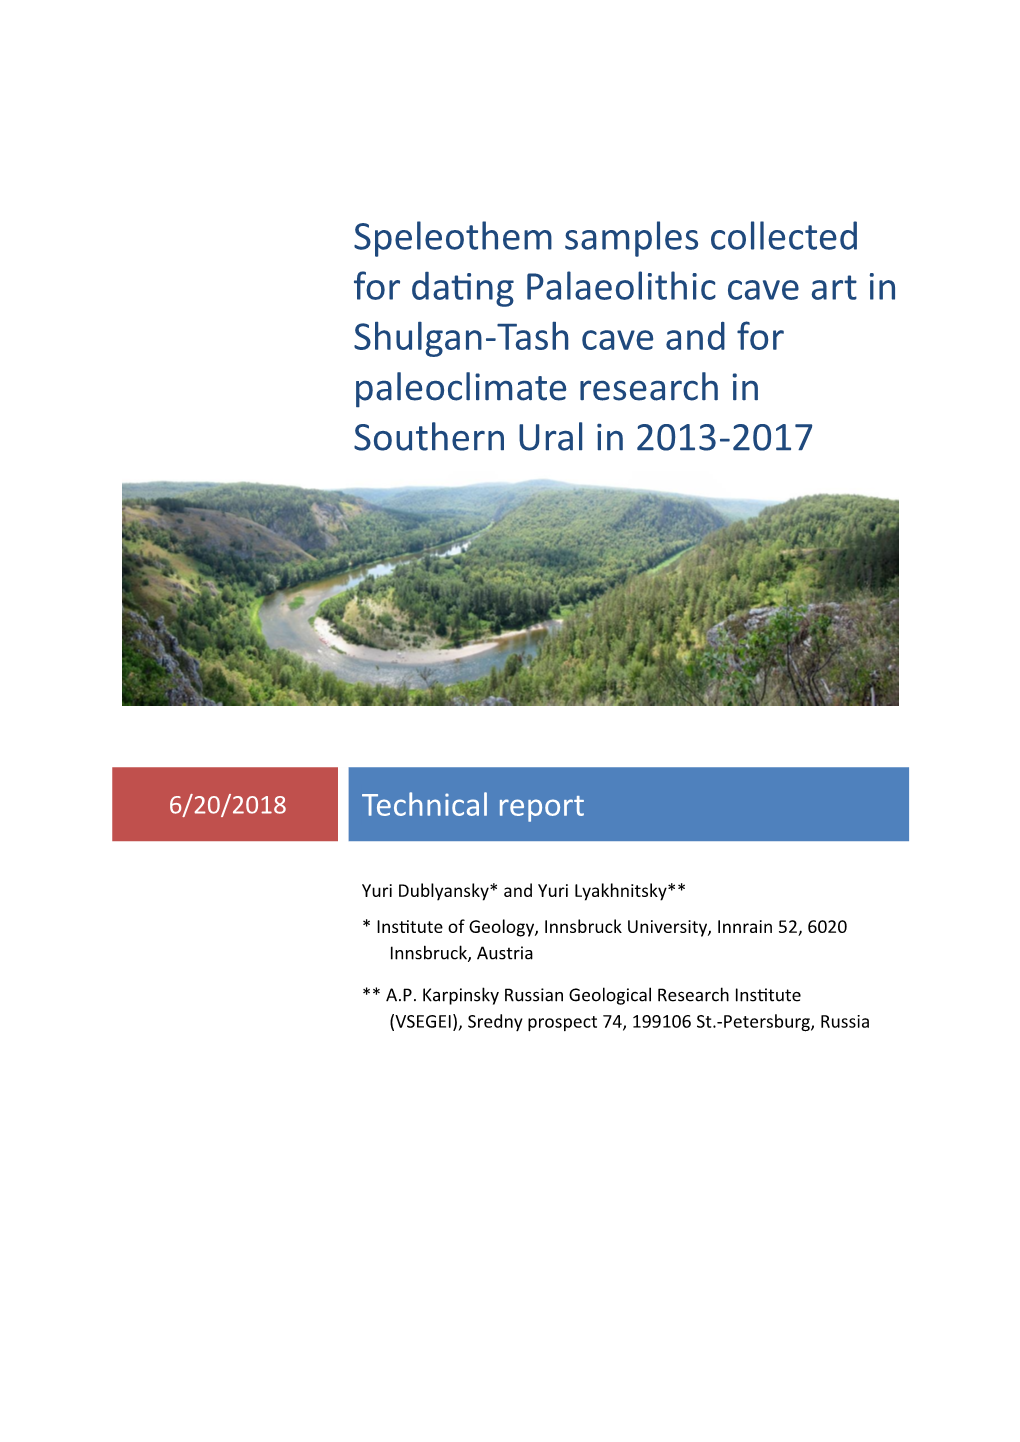 Speleothem Samples Collected for Dating Palaeolithic Cave Art in Shulgan-Tash Cave and for Paleoclimate Research in Southern Ural in 2013-2017